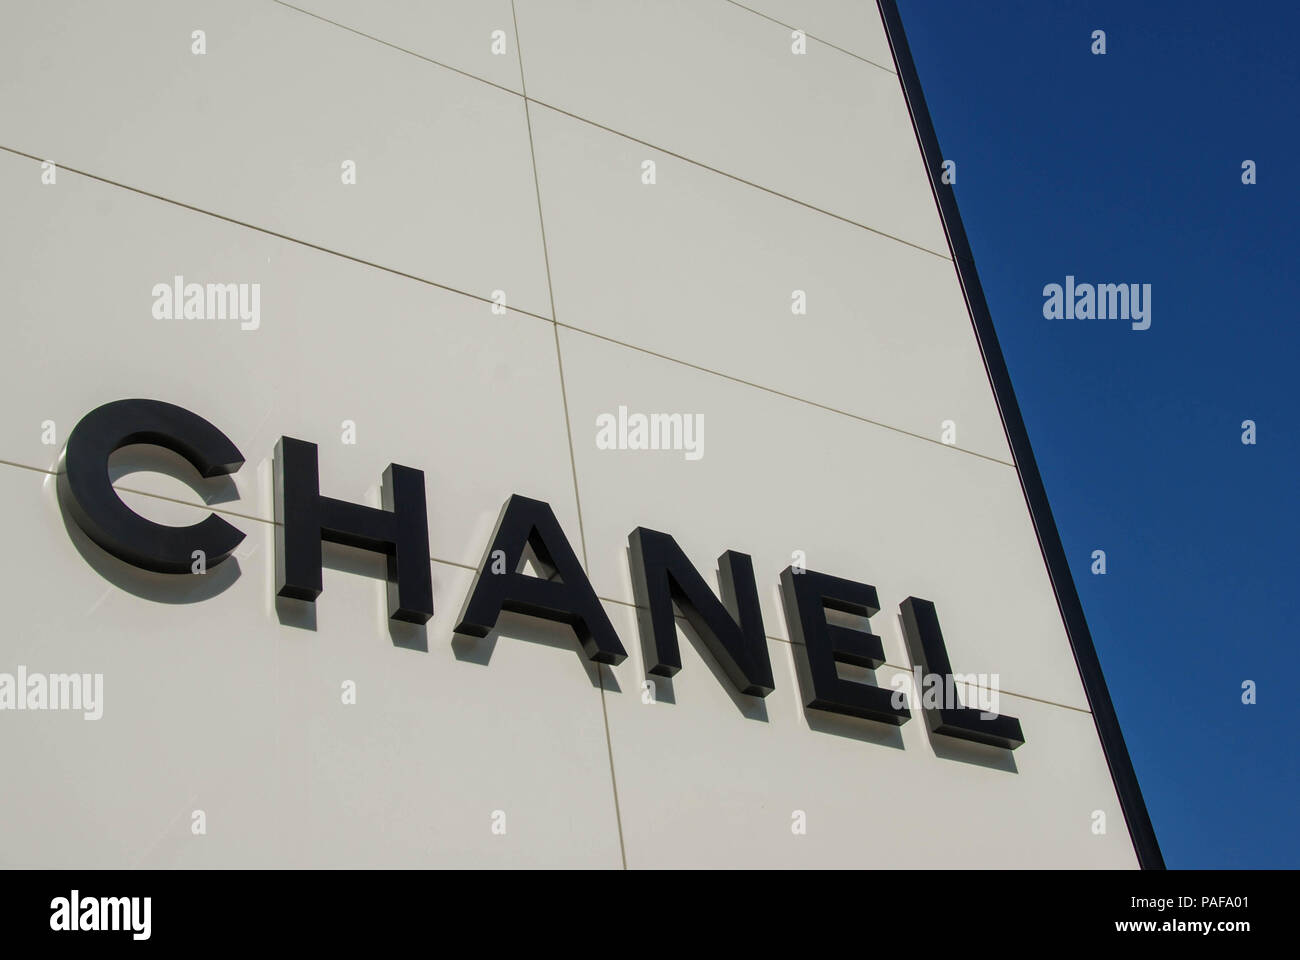 chanel outlet